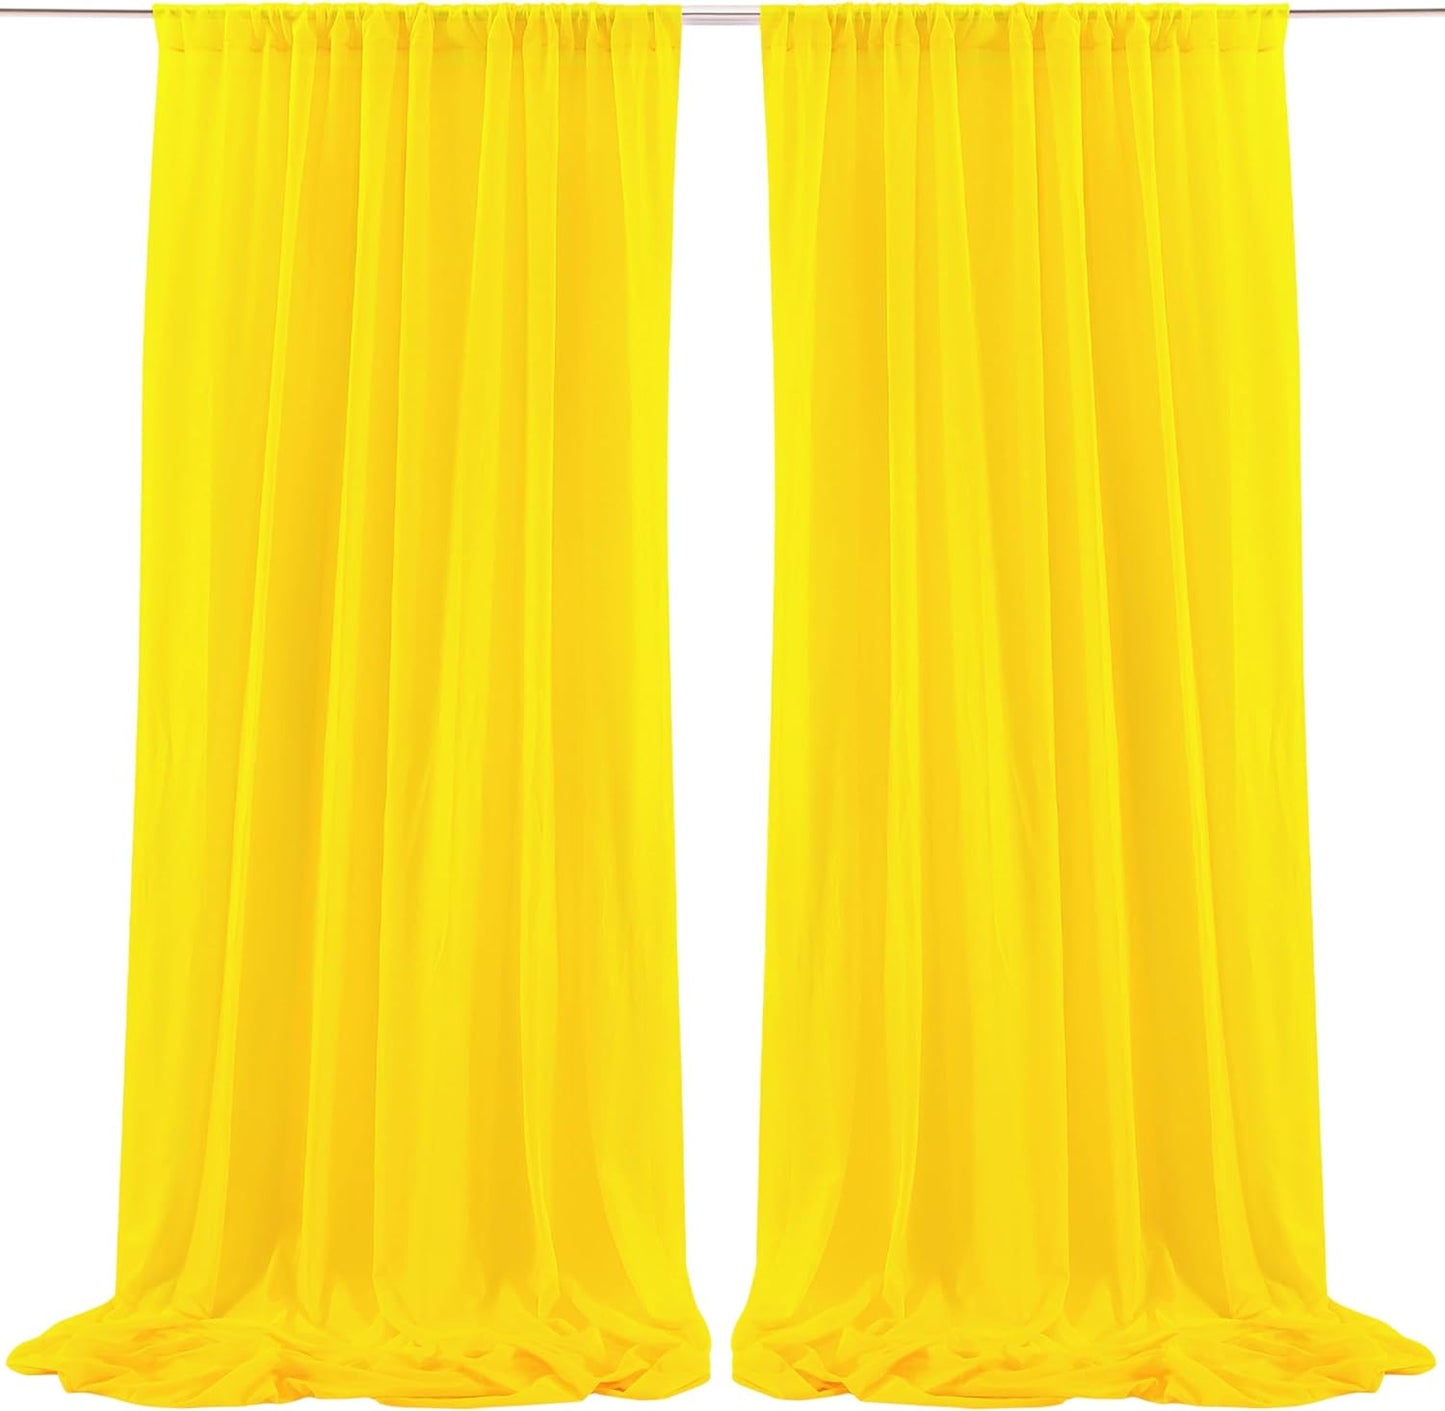 10Ft X 10Ft White Chiffon Backdrop Curtains, Wrinkle-Free Sheer Chiffon Fabric Curtain Drapes for Wedding Ceremony Arch Party Stage Decoration  Wish Care Yellow  